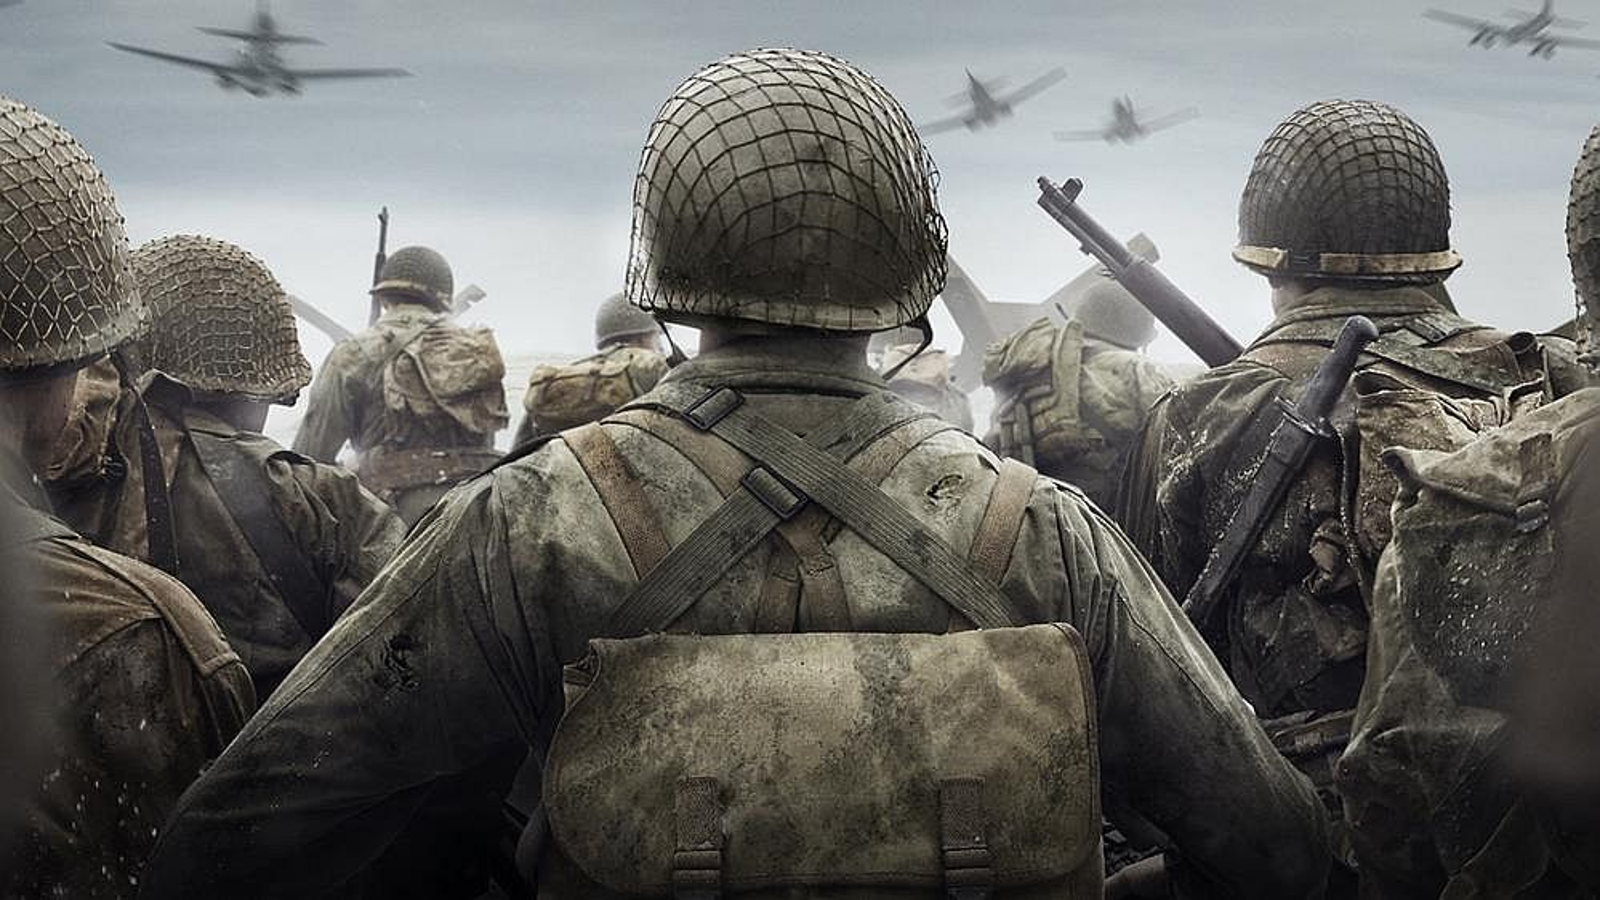 Call of Duty WW2 UK release date: Available for preorder and pre-download